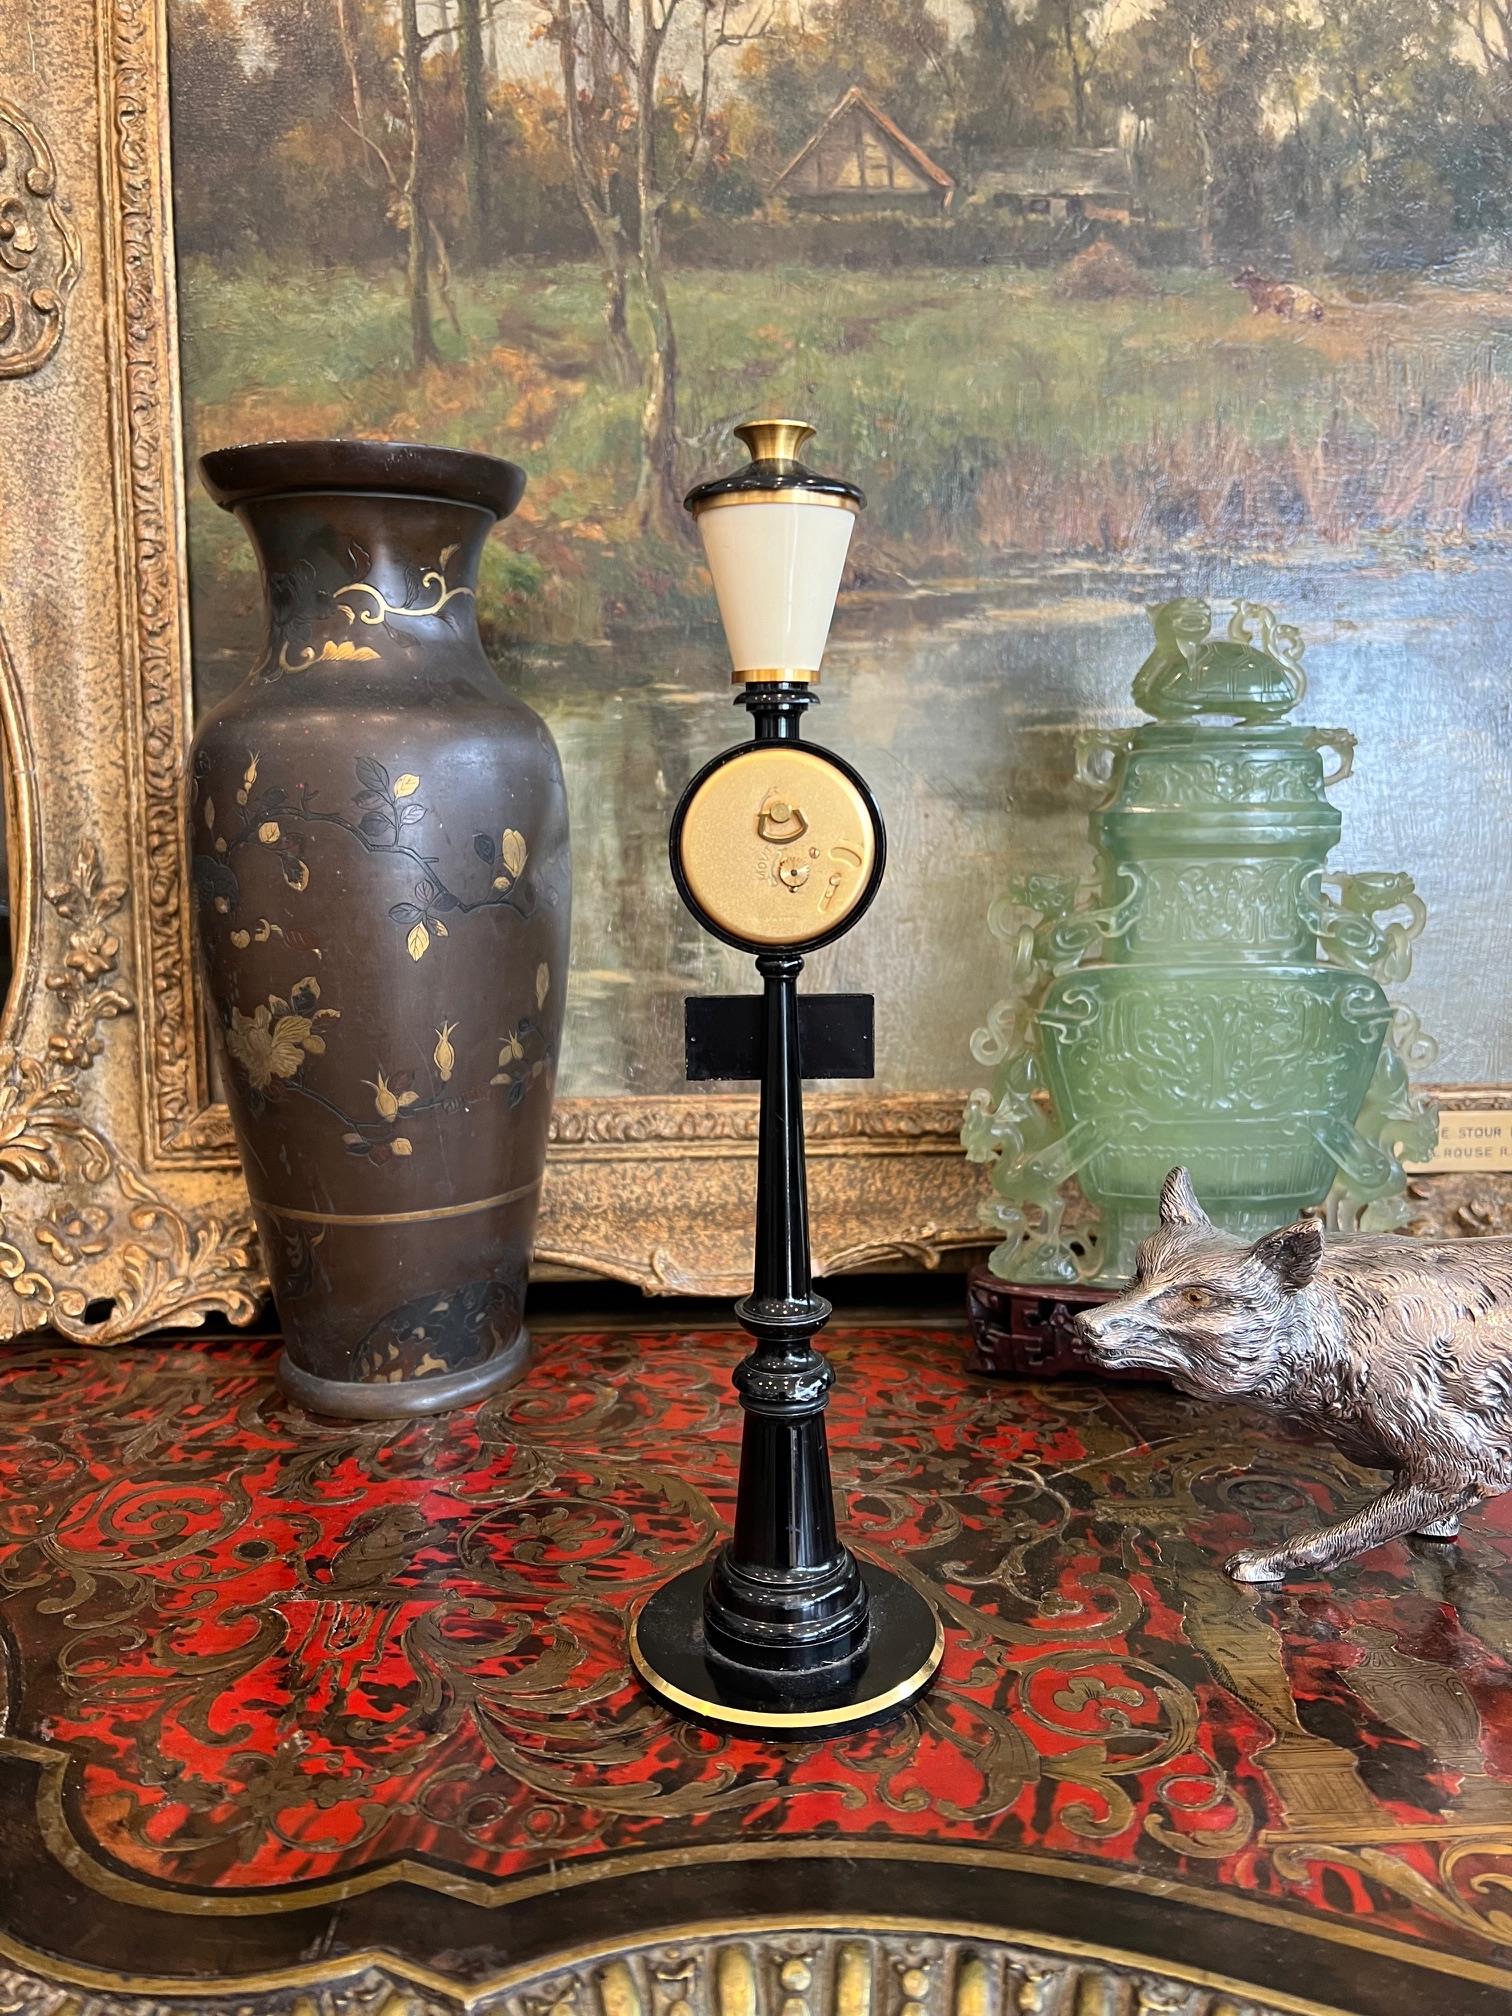 A JAEGER LECOULTRE NOVELTY DESK CLOCK MODELLED AS A LAMP POST - Image 2 of 4